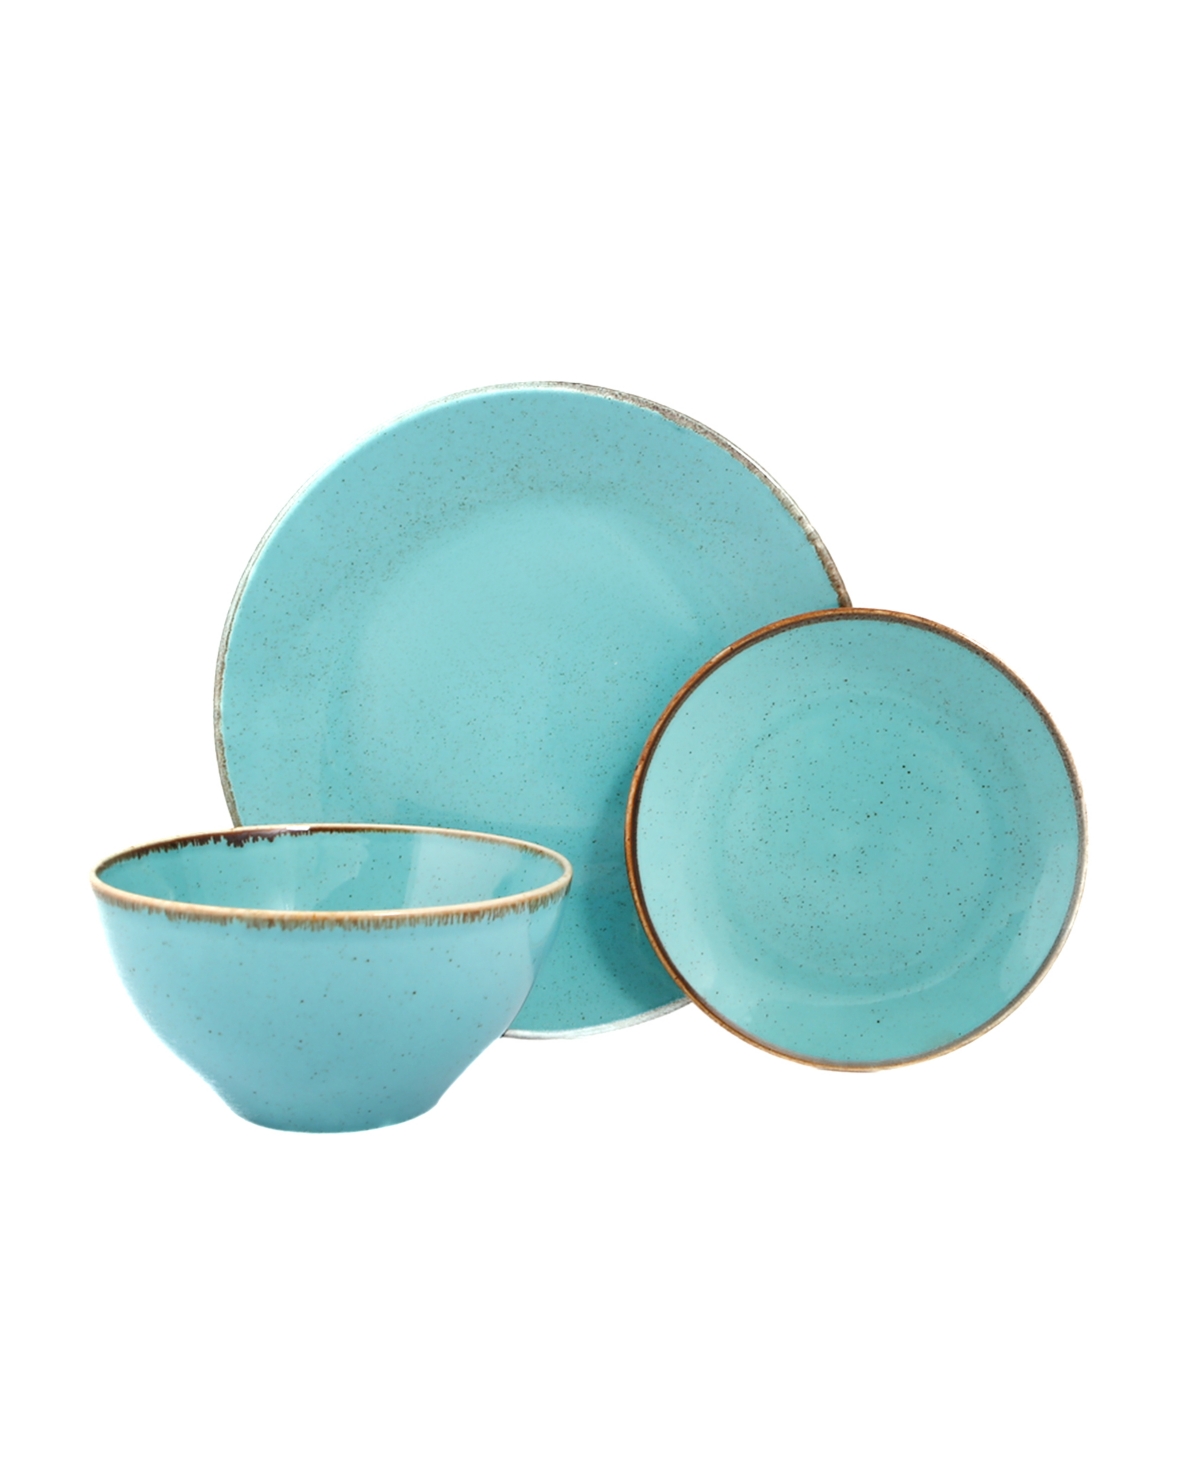 Seasons 3-Piece Place Setting - Turquoise